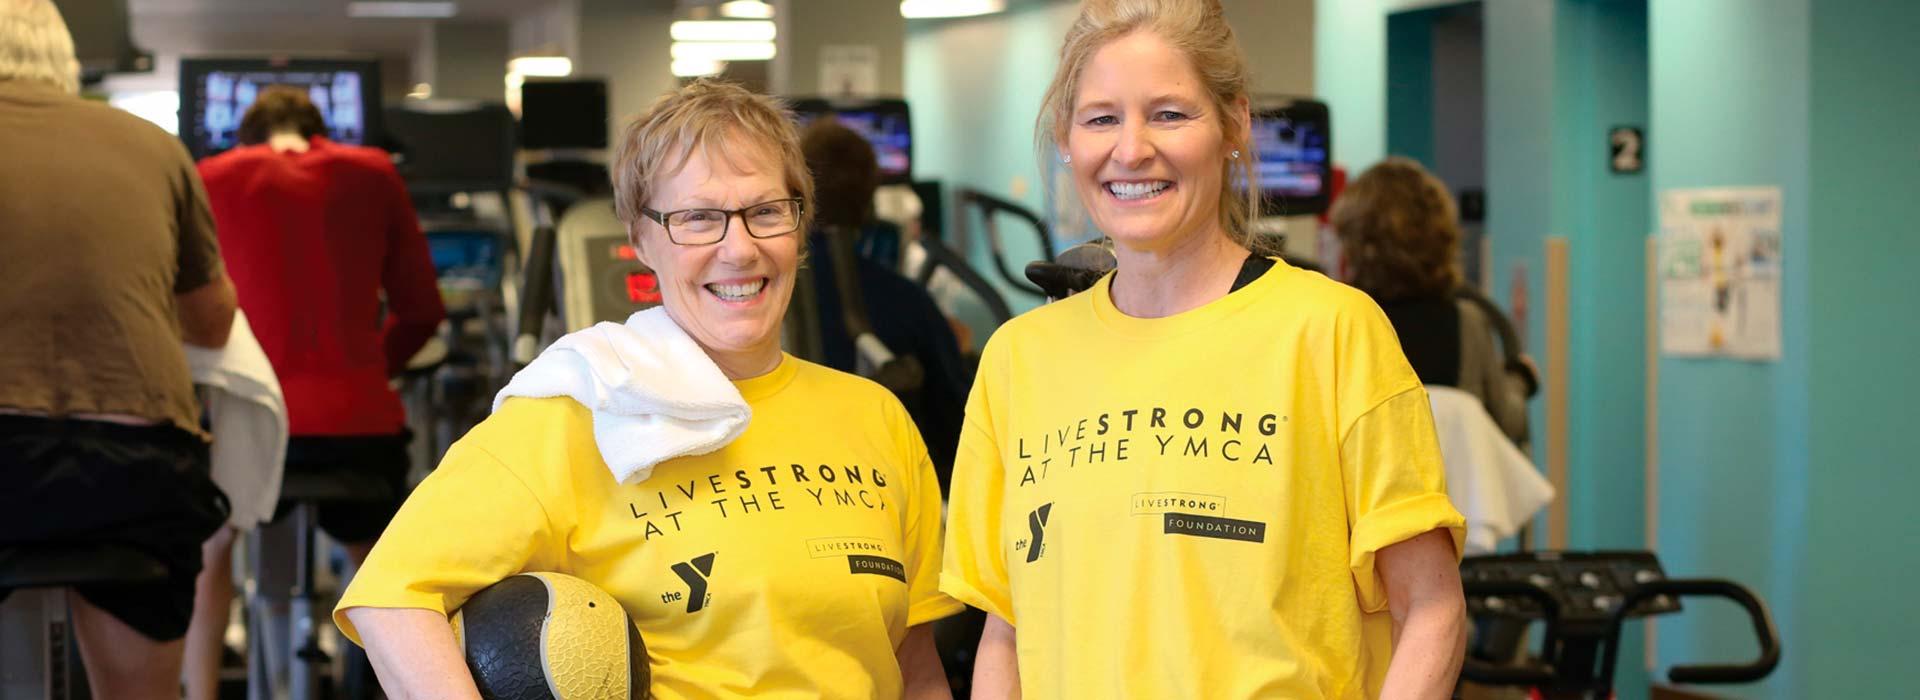 Two LIVESTRONG at the YMCA participants smiling at the camera with the Wellness Center in the background